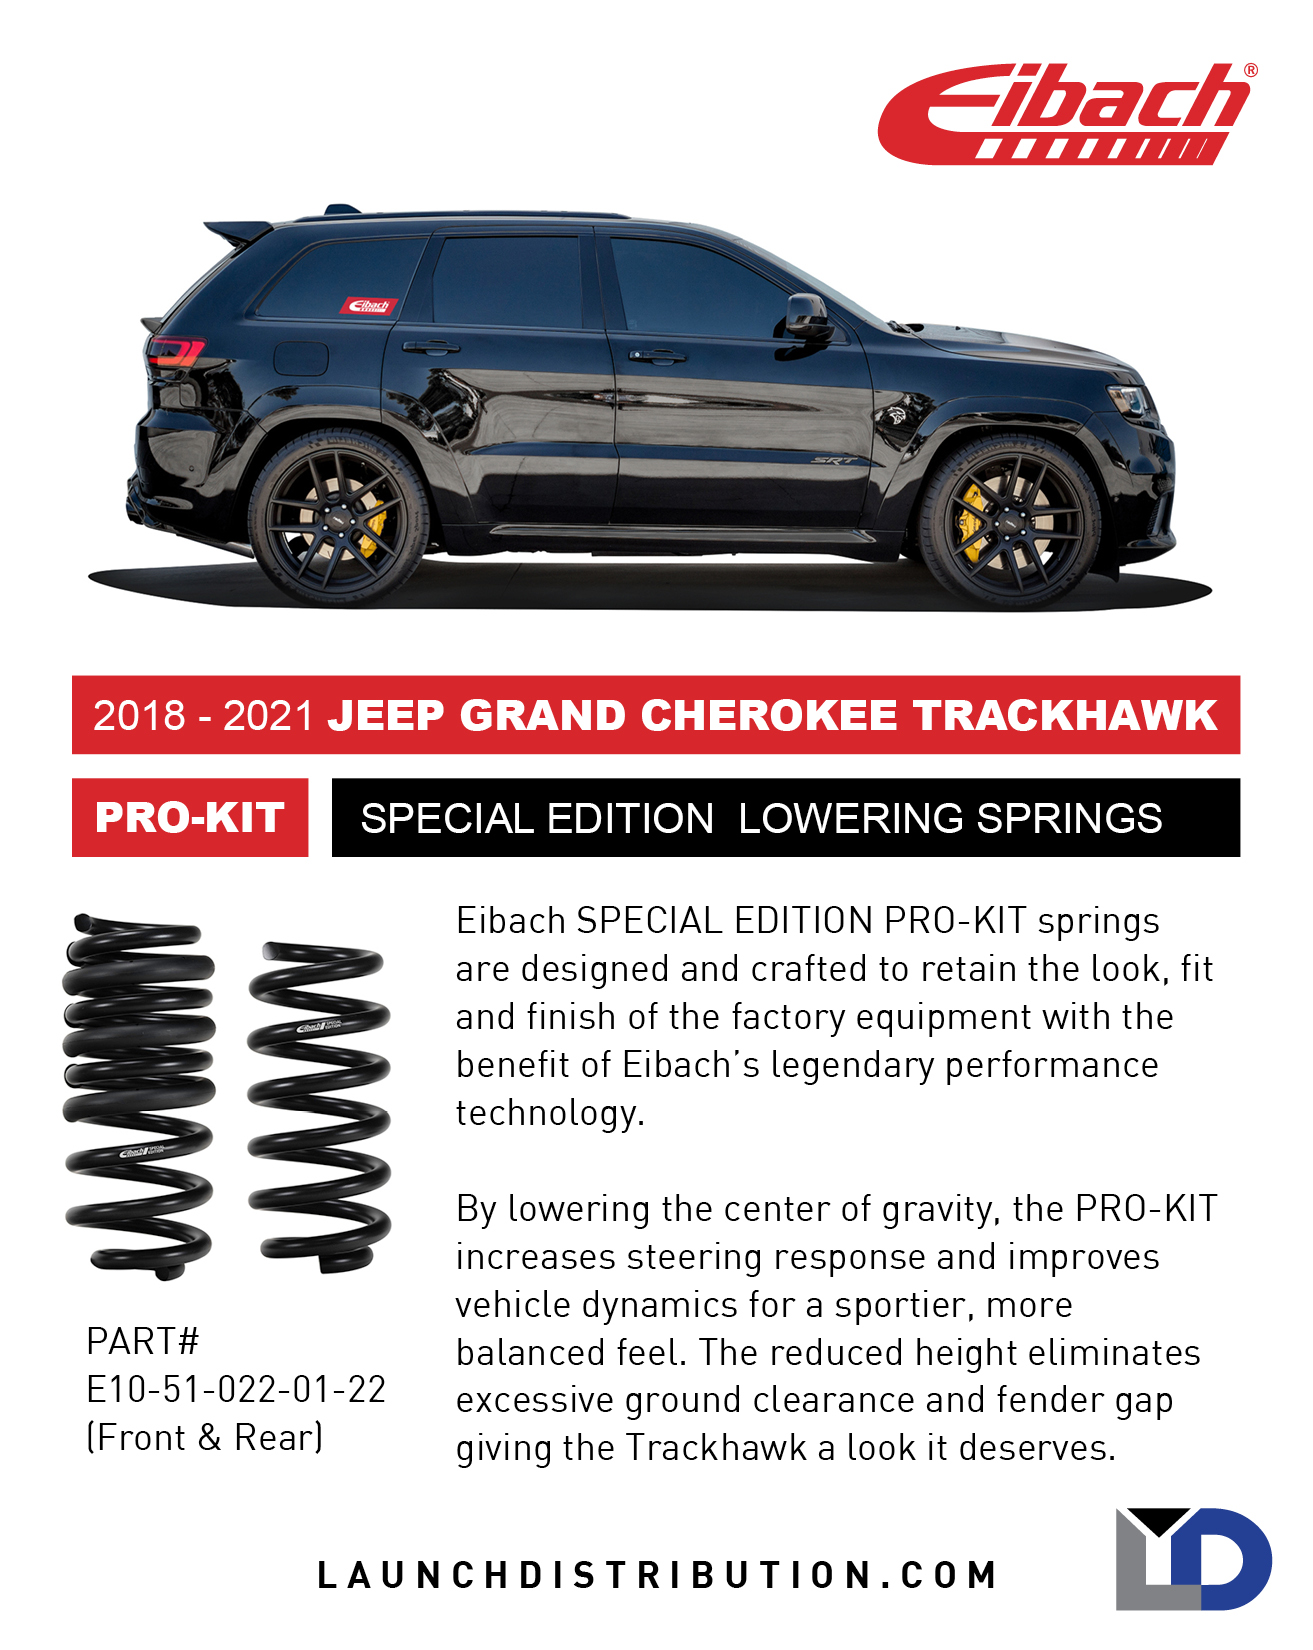 Eibach PRO-KIT Lowering Spring for 2018+ Jeep Grand Cherokee Trackhawk